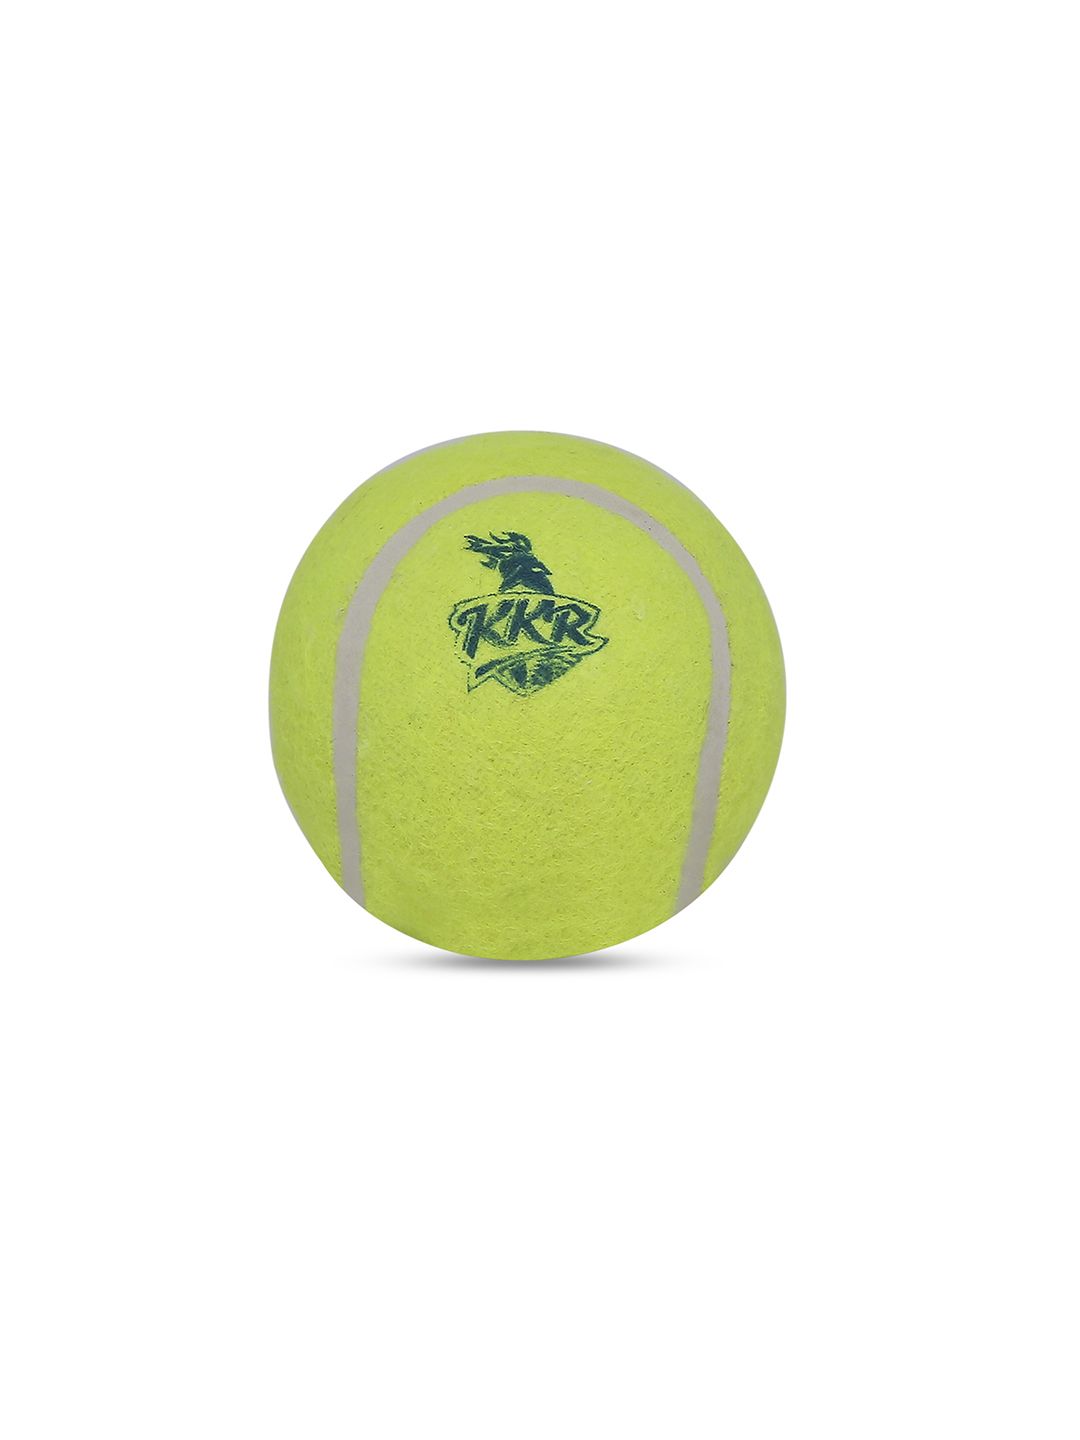 KKR Official IPL 2023 Tennis Ball with 50 GMS (Yellow) - Pack of 3